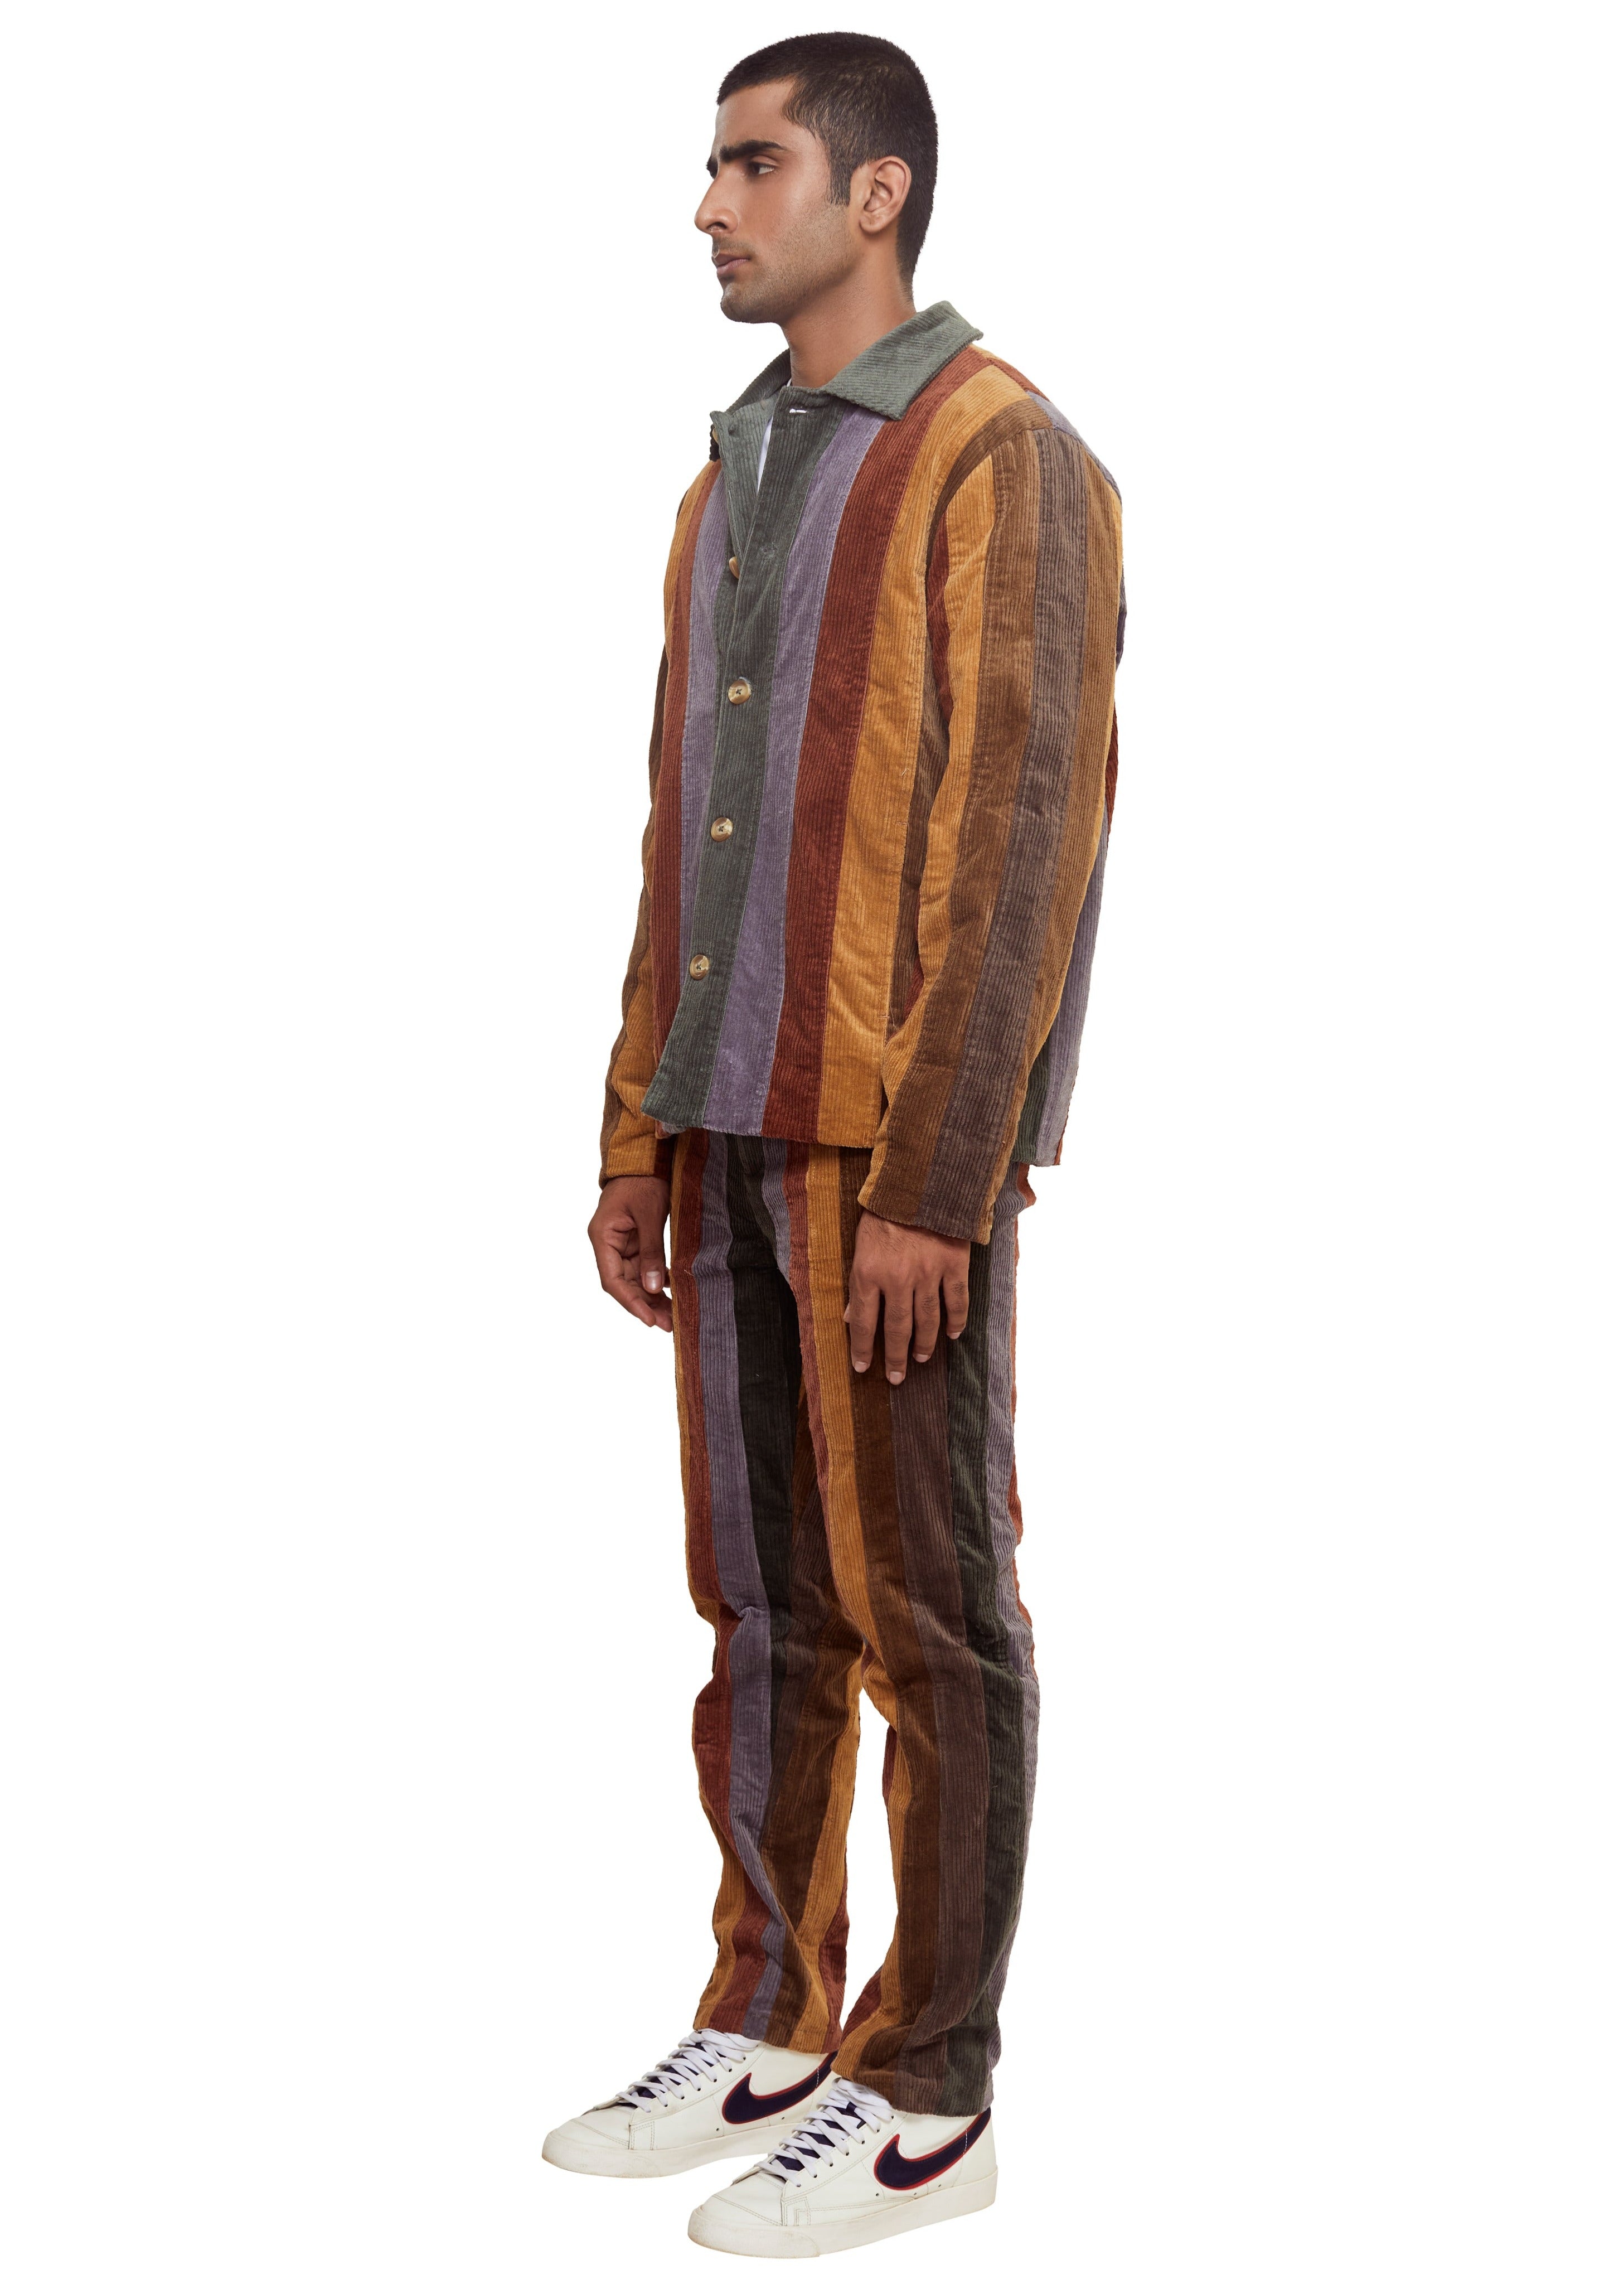 Brown cotton Vertical Paneled Corduroy Jacket from the brand Yitai